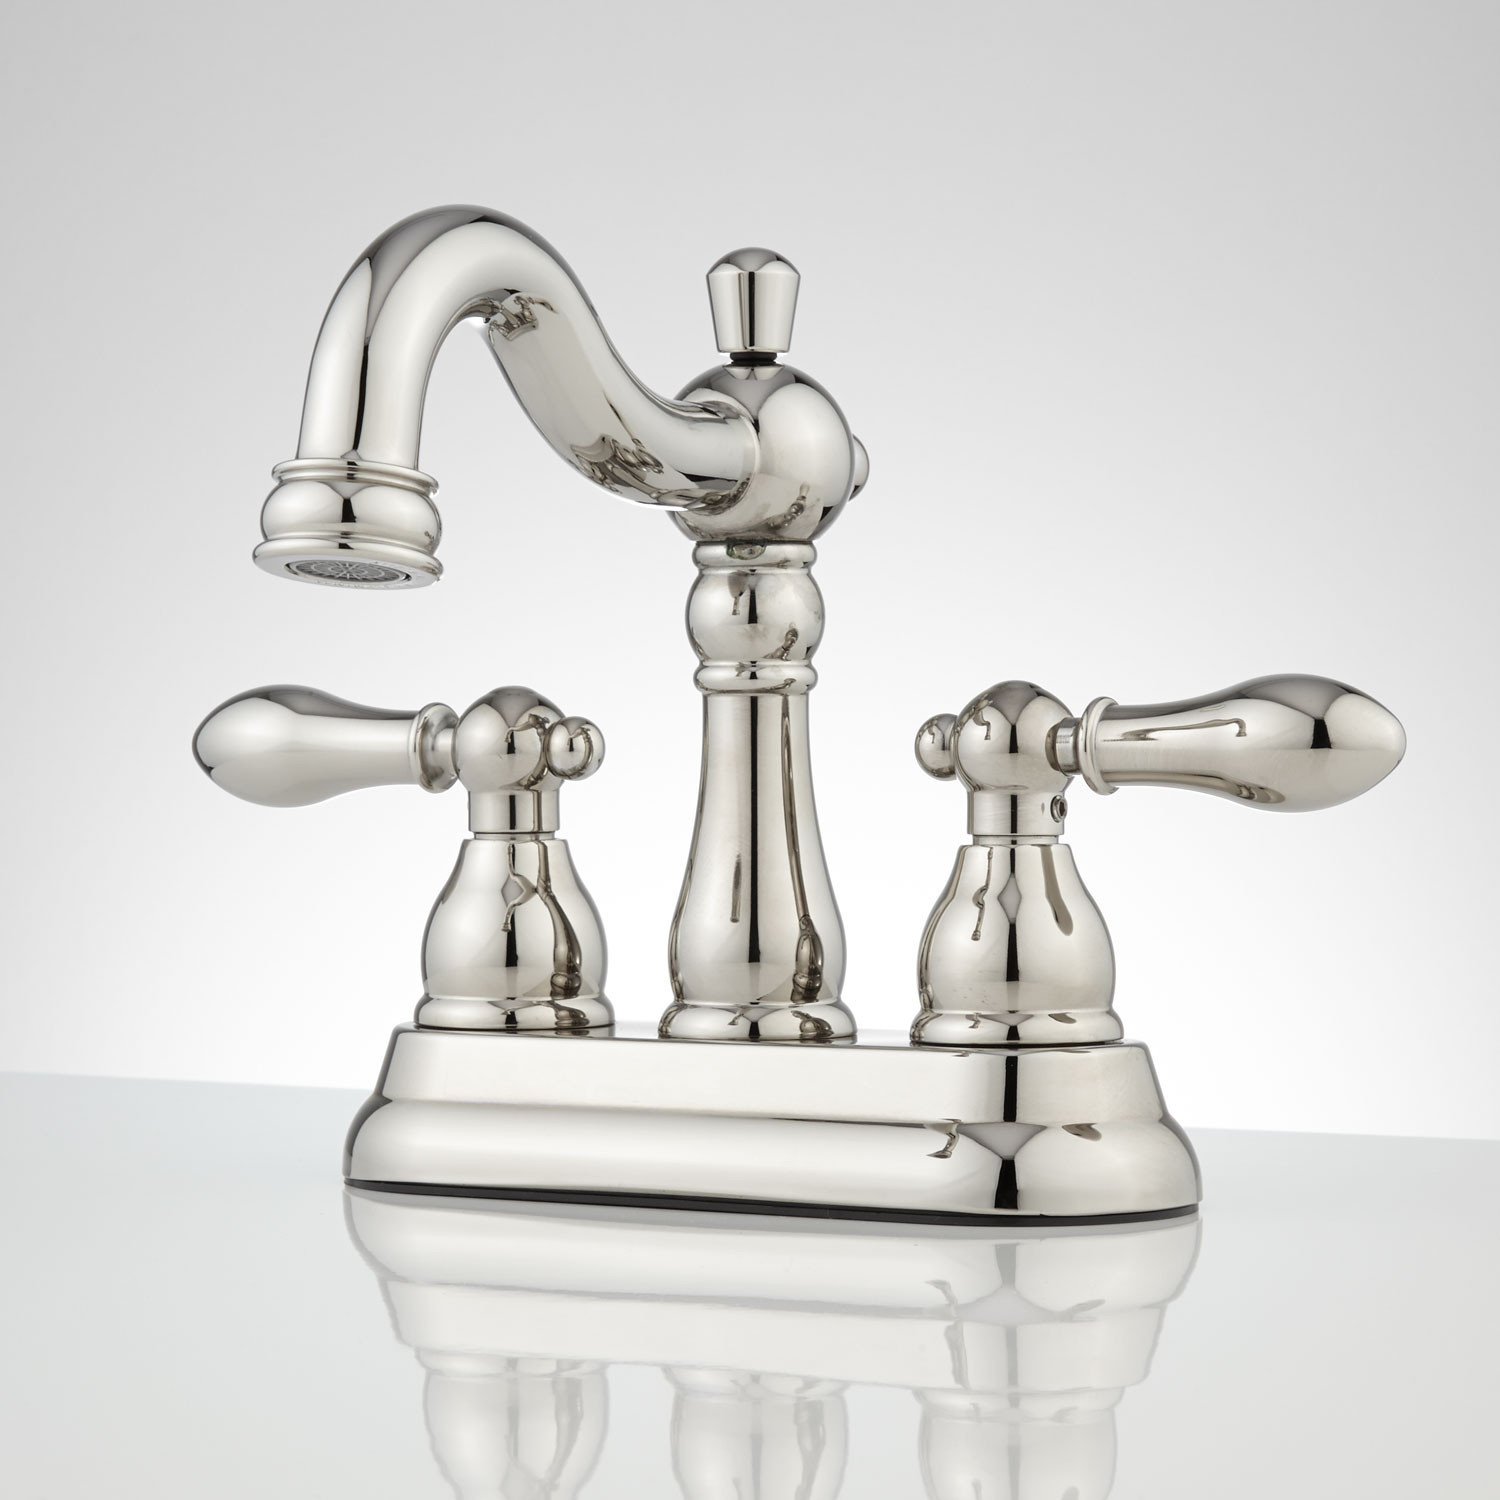 Bathroom Sinks And Faucets
 Menza Centerset Bathroom Faucet Bathroom Sink Faucets